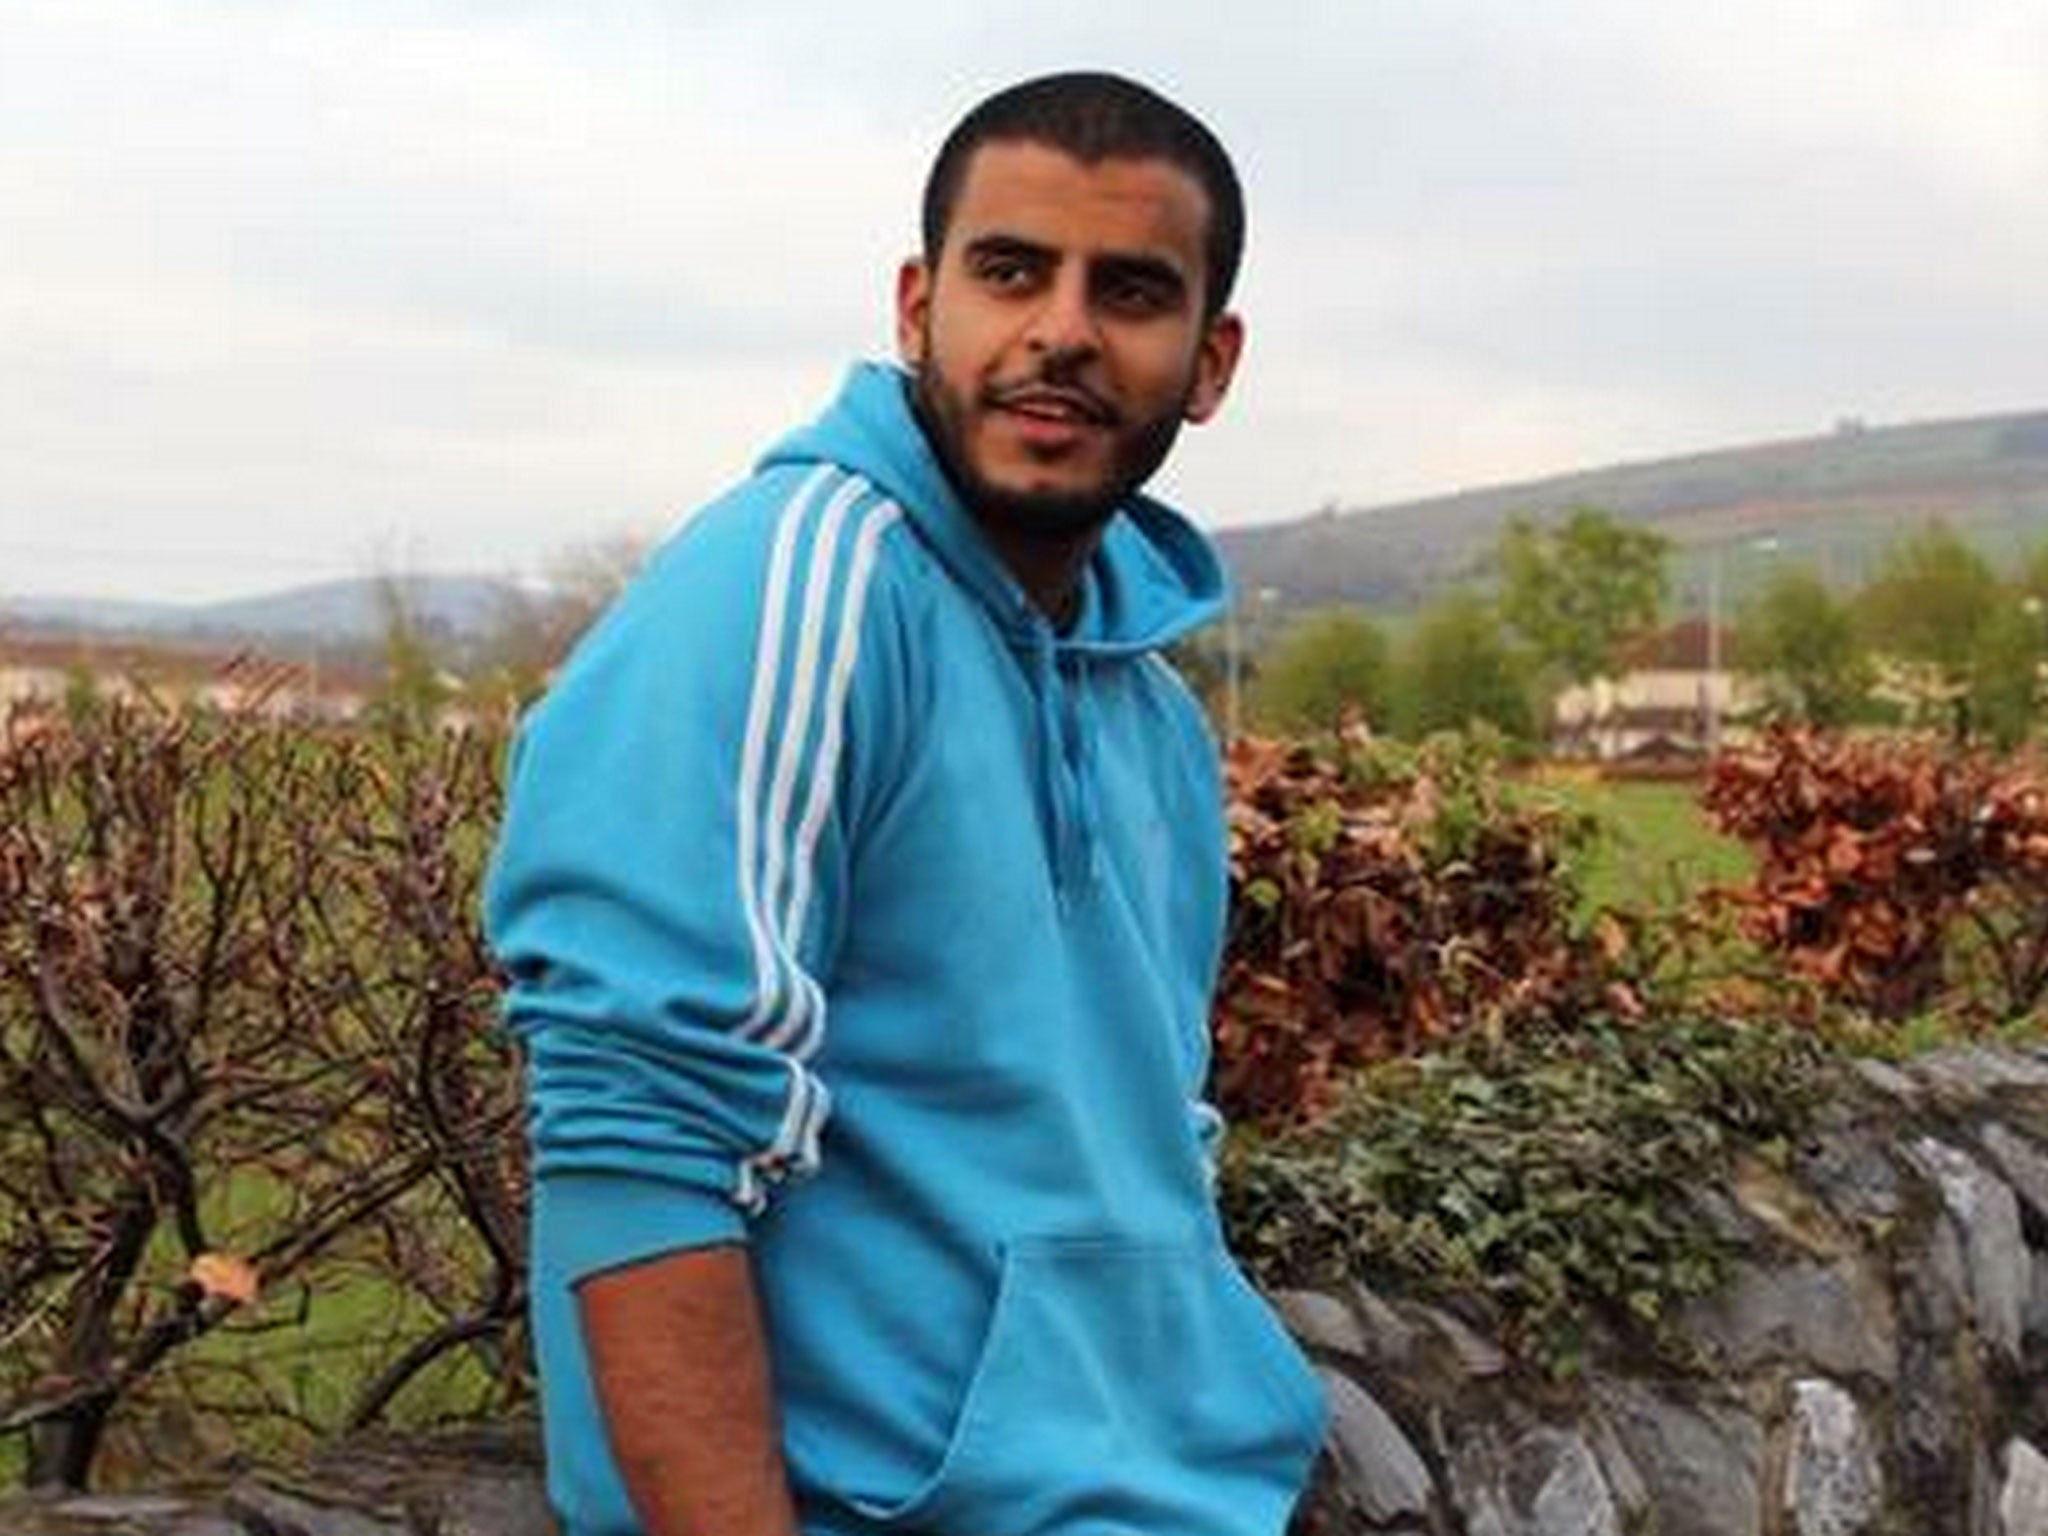 Ibrahim Halawa, 19, was arrested after attending a pro-democracy protest in Cairo with his three older sisters in August 2013